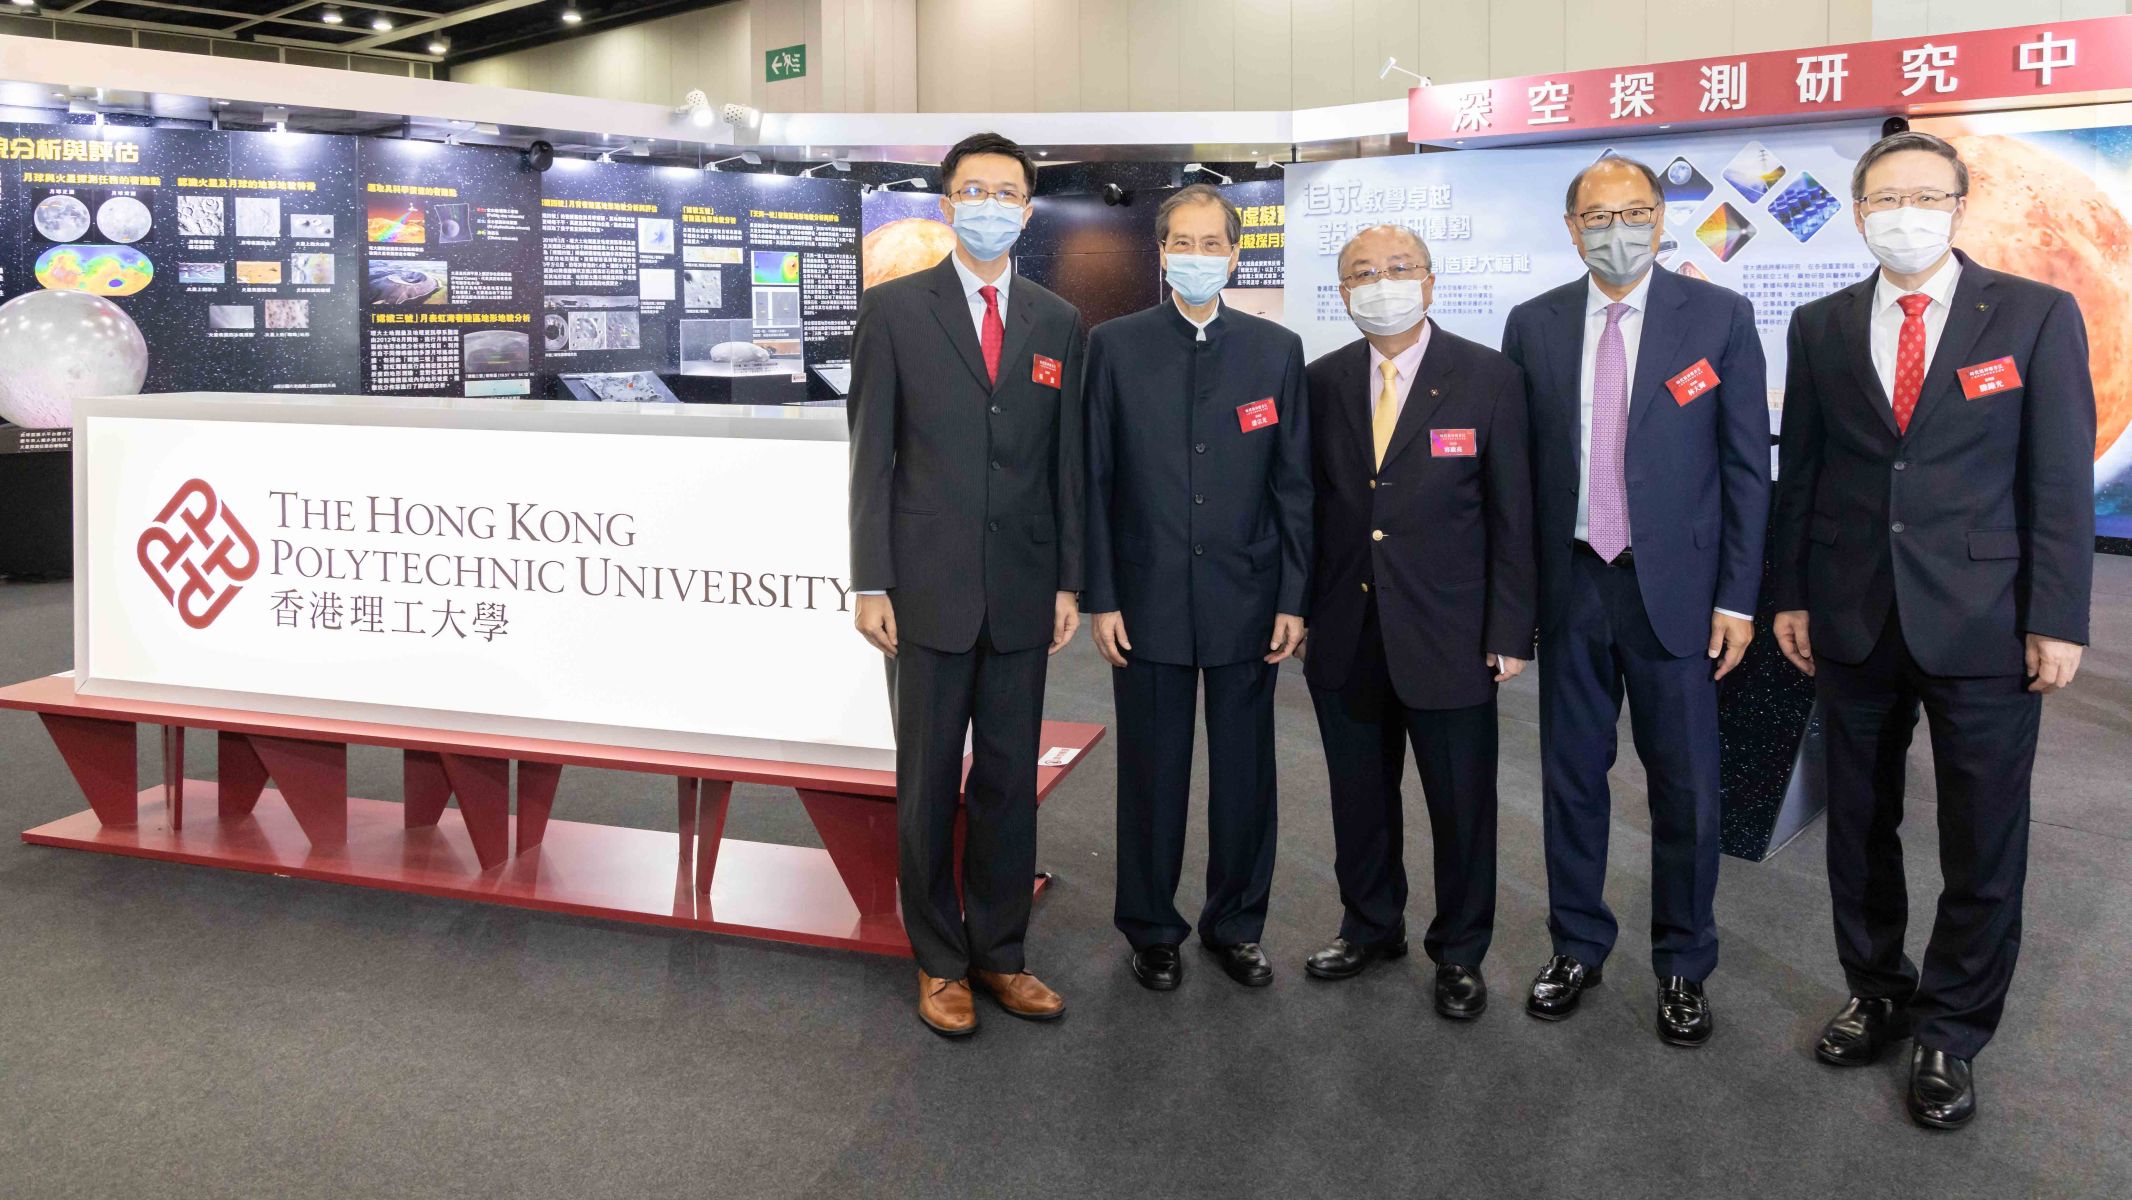 President Emeritus Prof Poon Chung-kwong (second from left) initiated cooperation with China National Space Administration’s lunar exploration progamme back in 2006, including trainings, researches and academic exchanges.